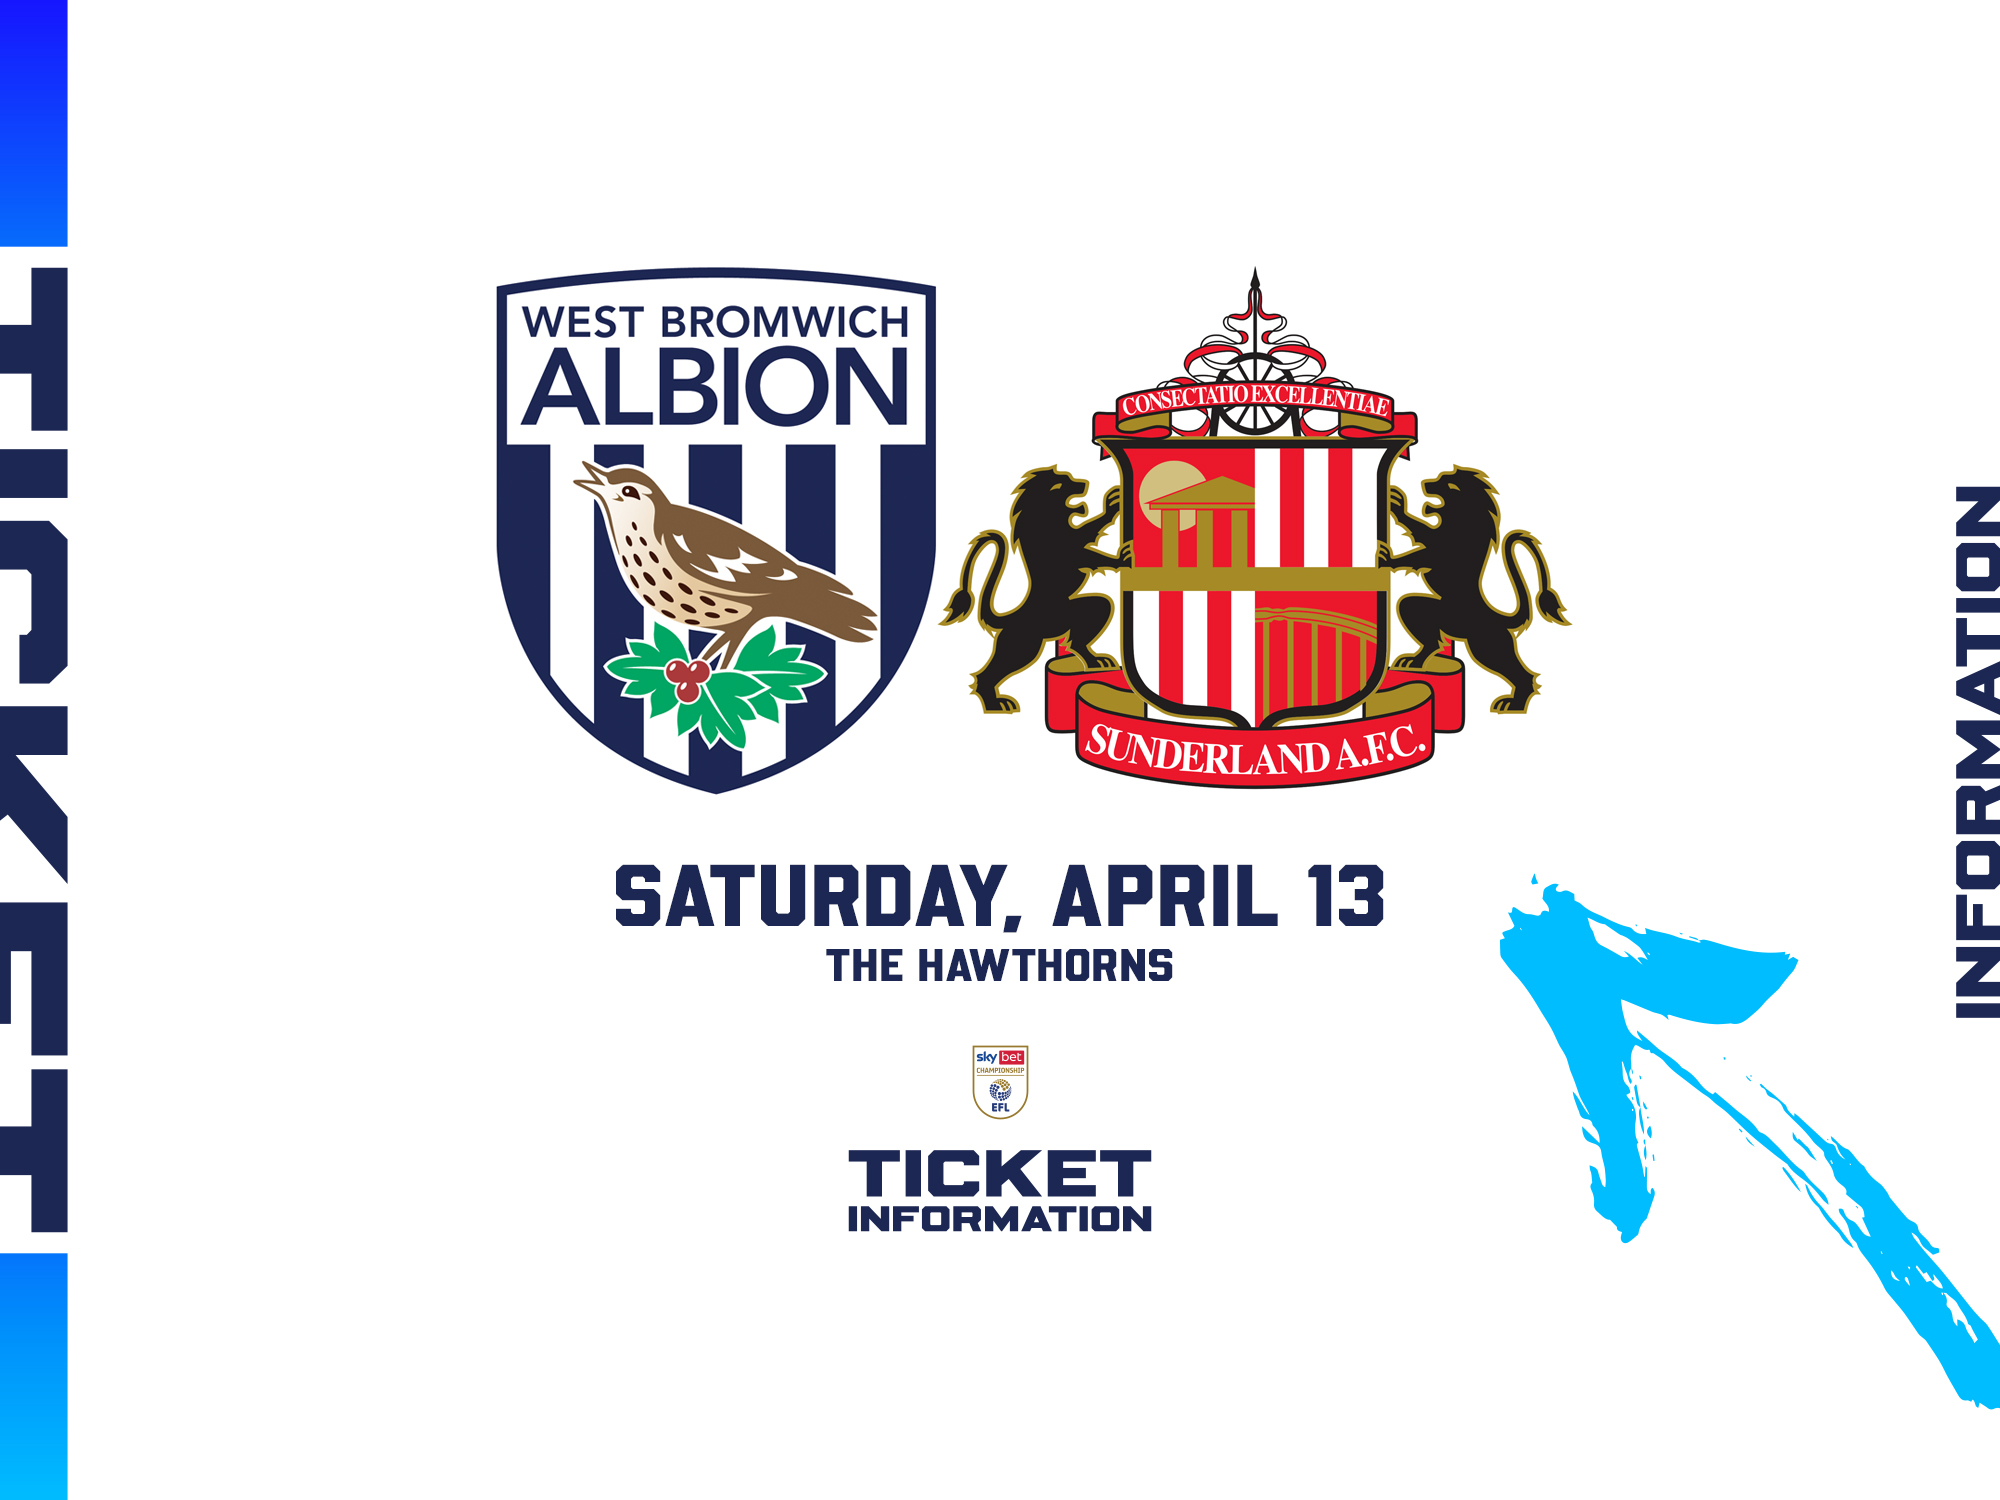 A ticket graphic displaying information for Albion's game against Sunderland